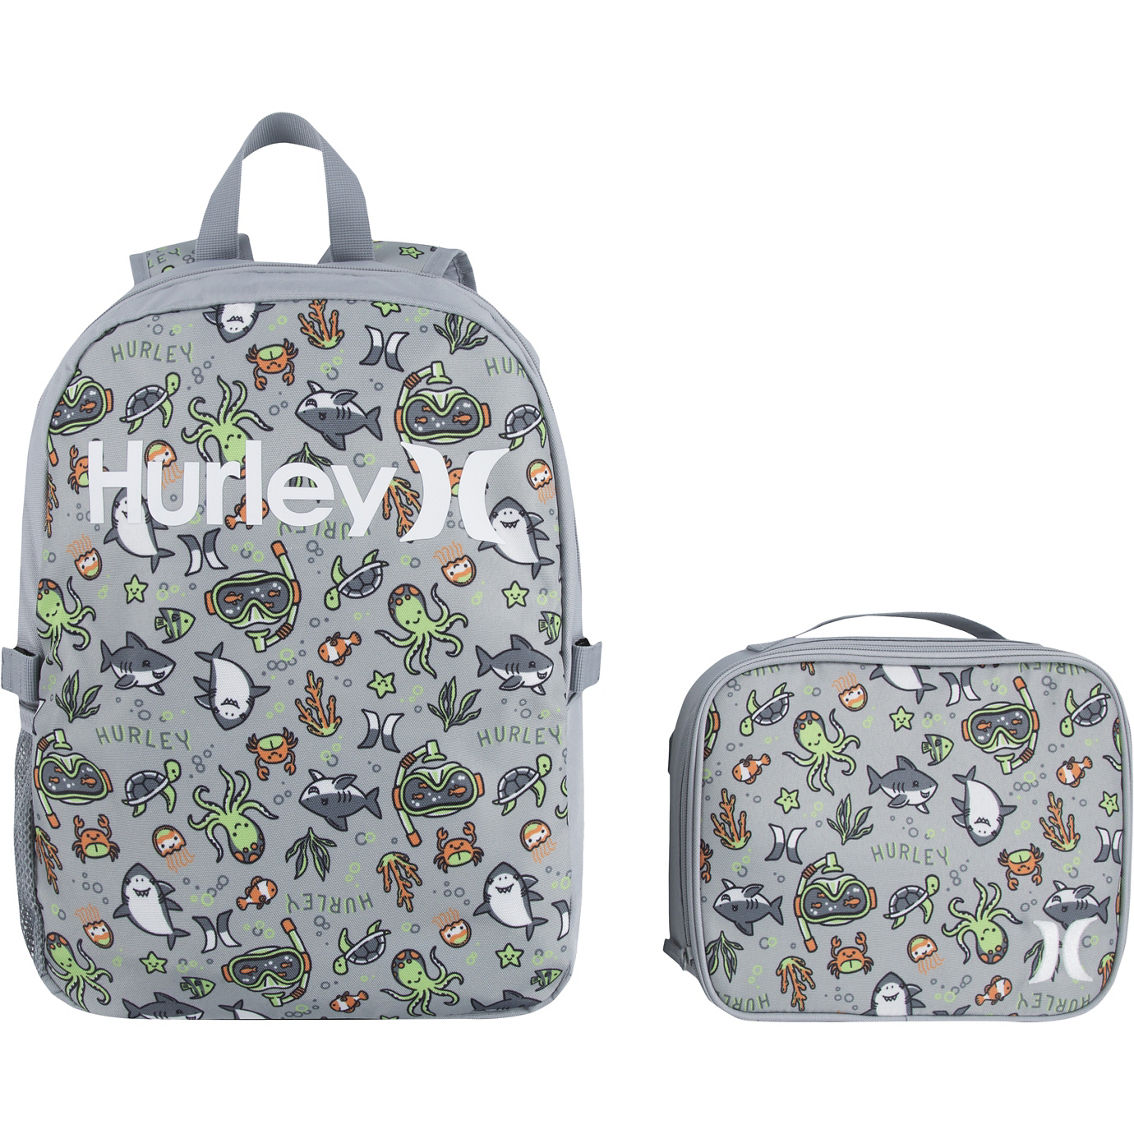 Hurley One and Only Backpack and Lunch Combo - Image 1 of 10